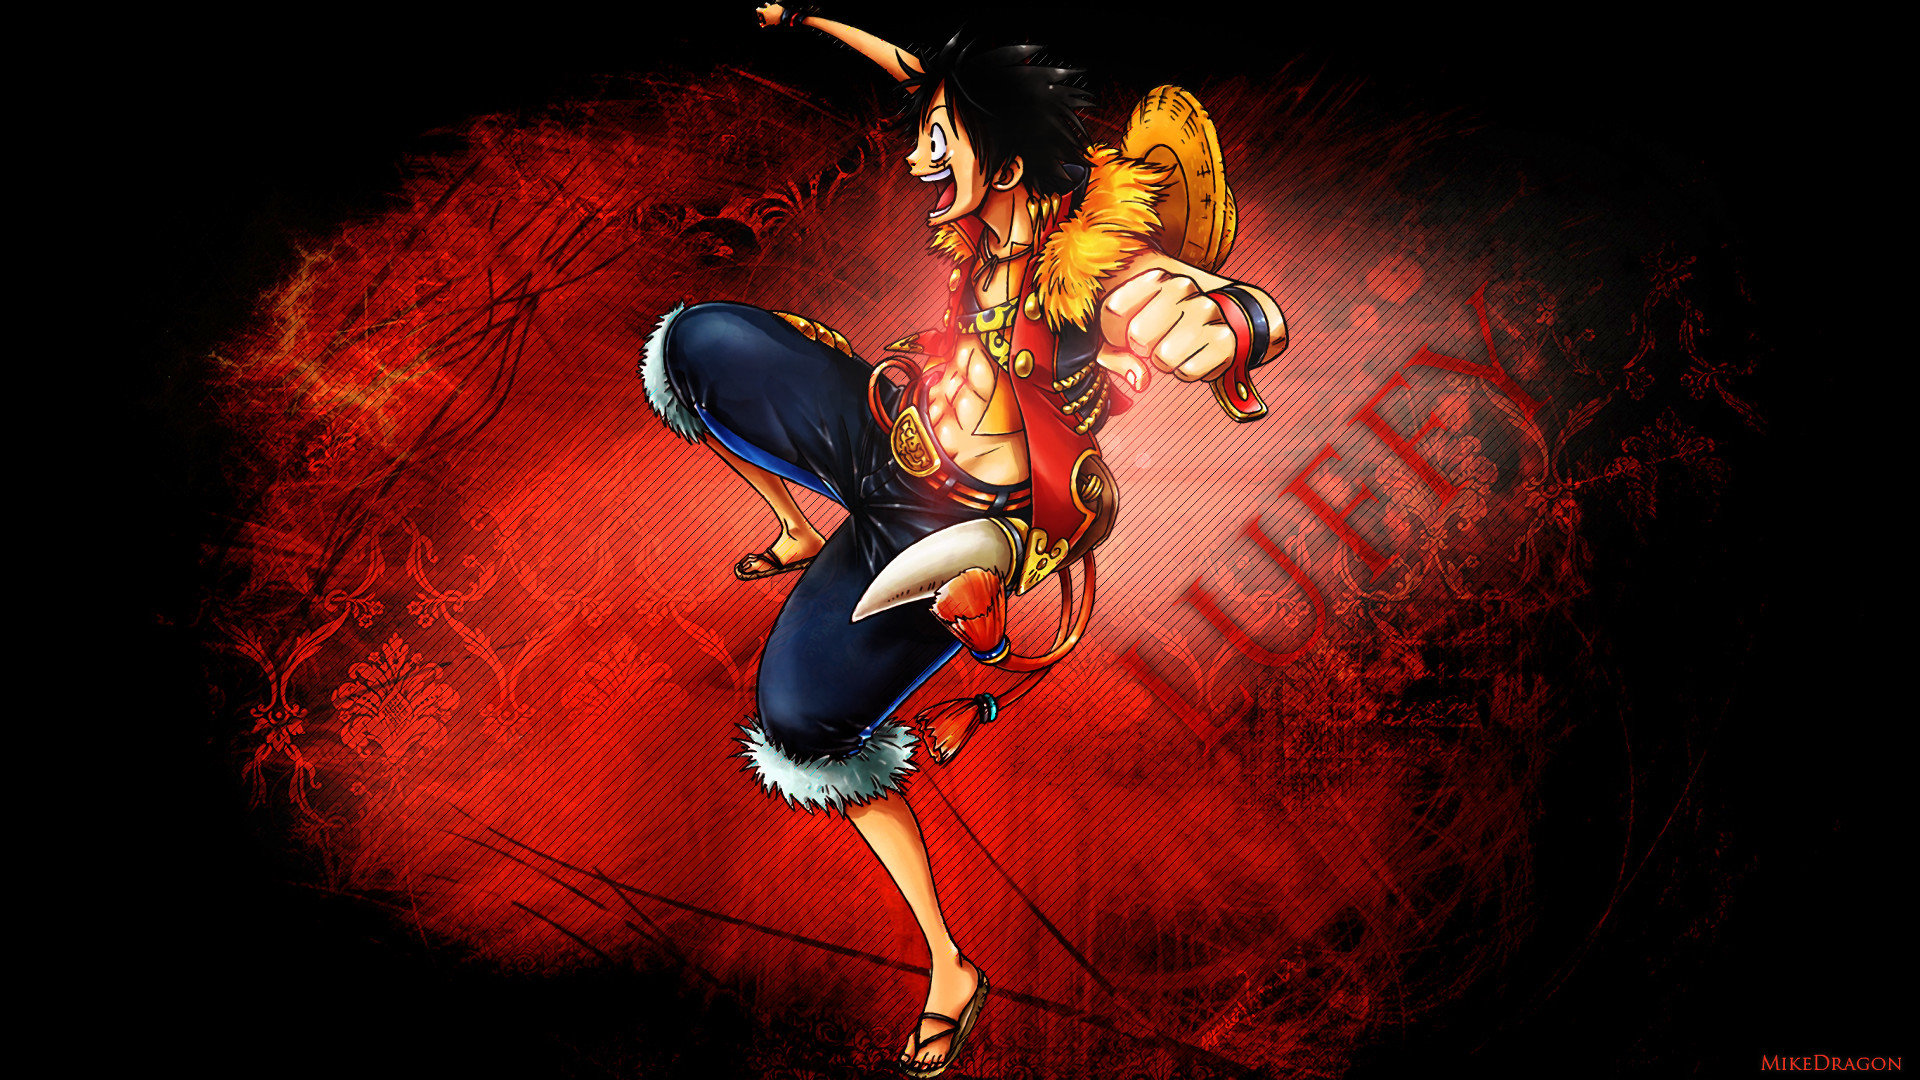 Wallpaper Hd Luffy Android